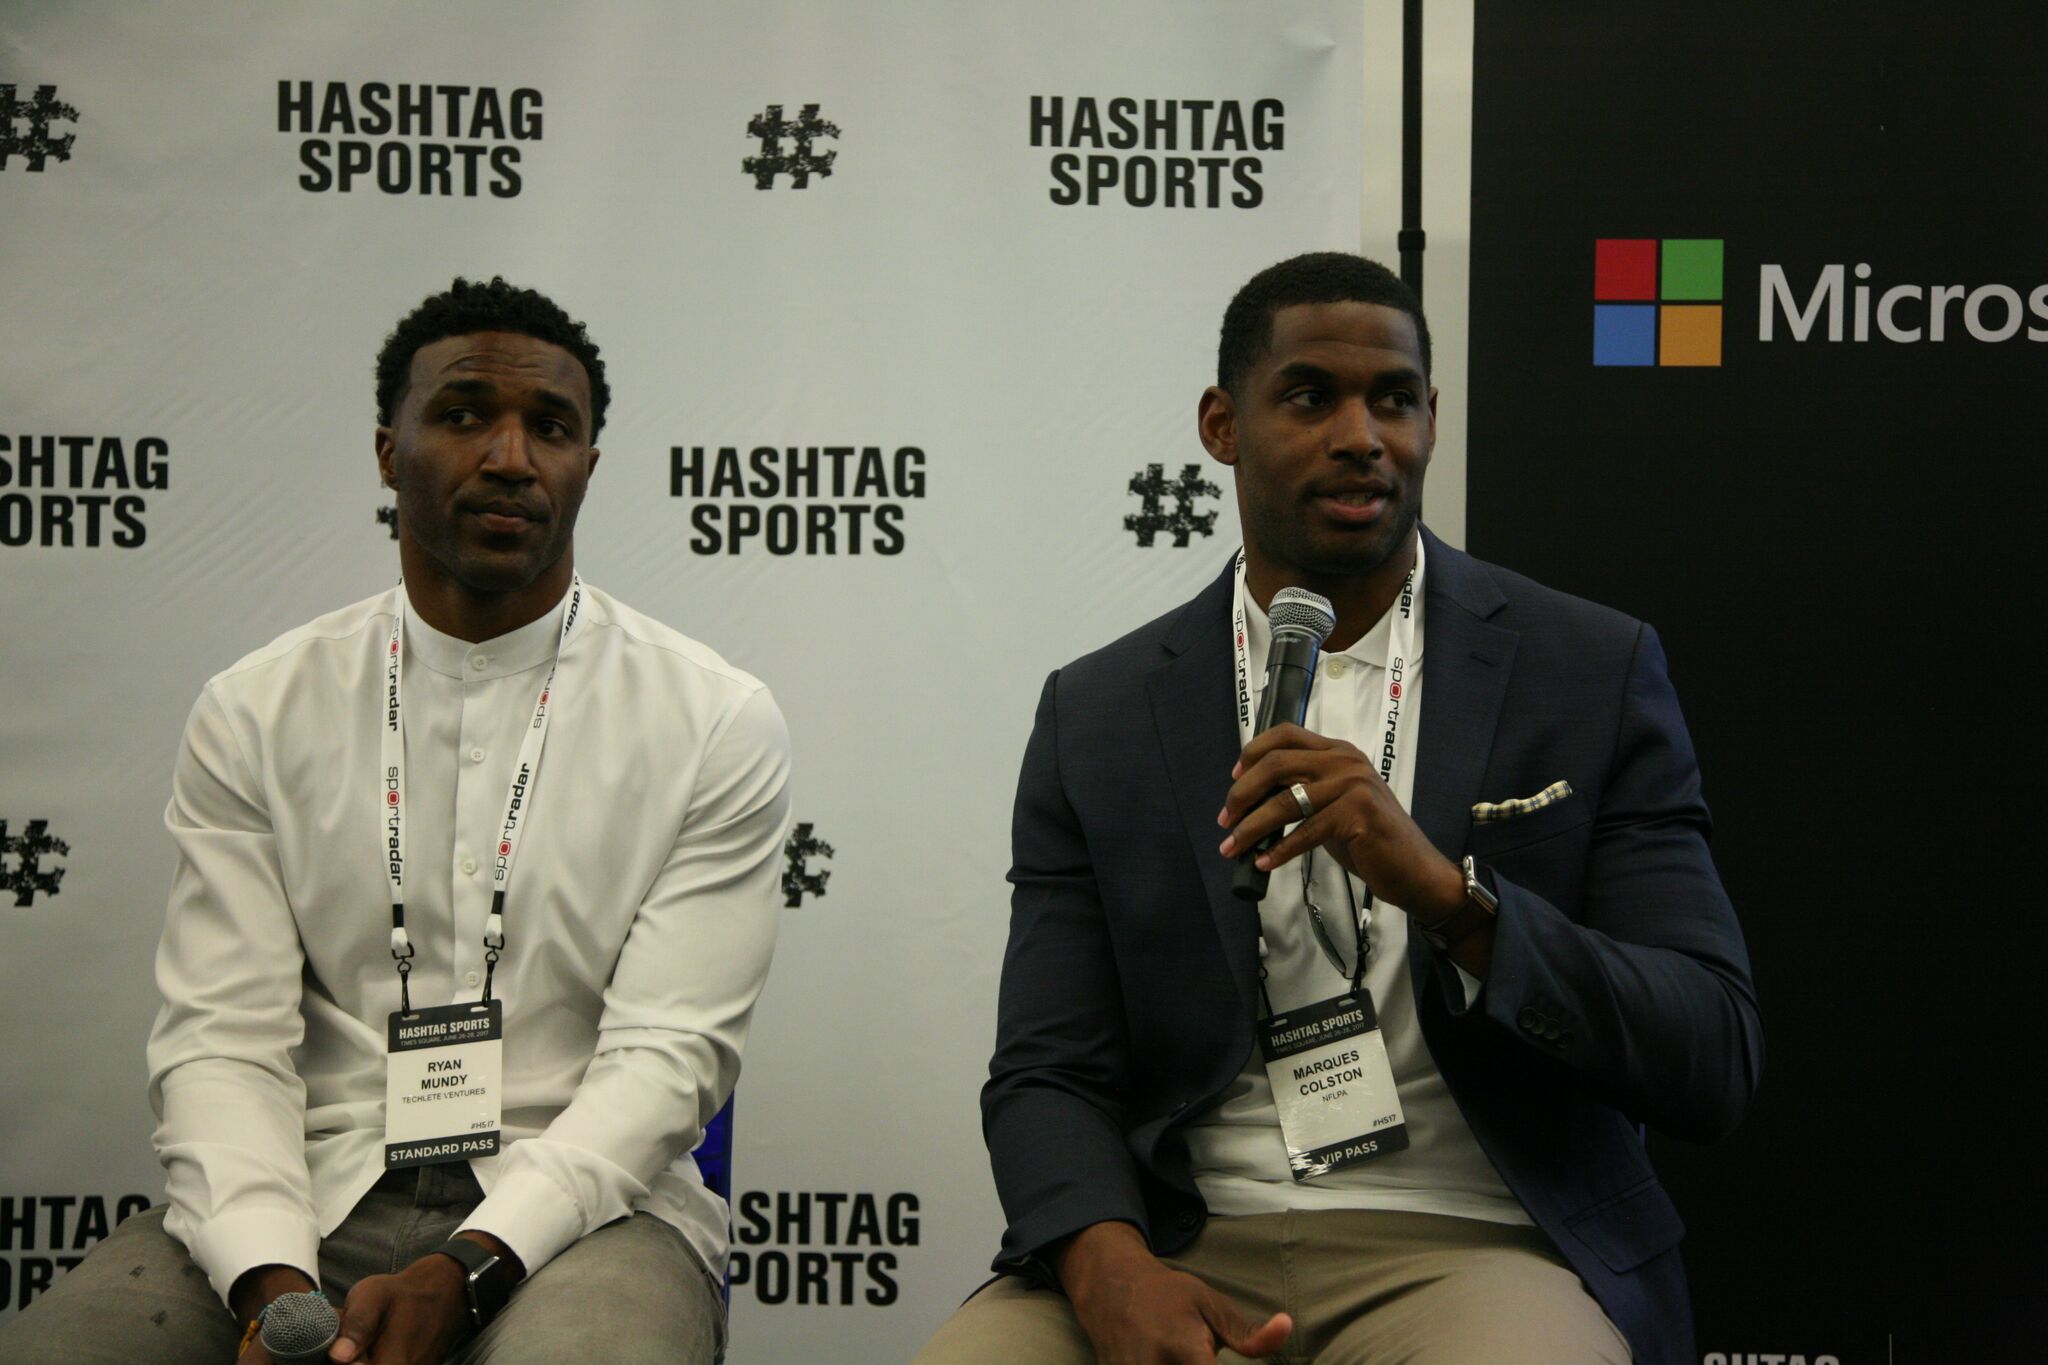 Marques Colston speaking at Hashtag Sports